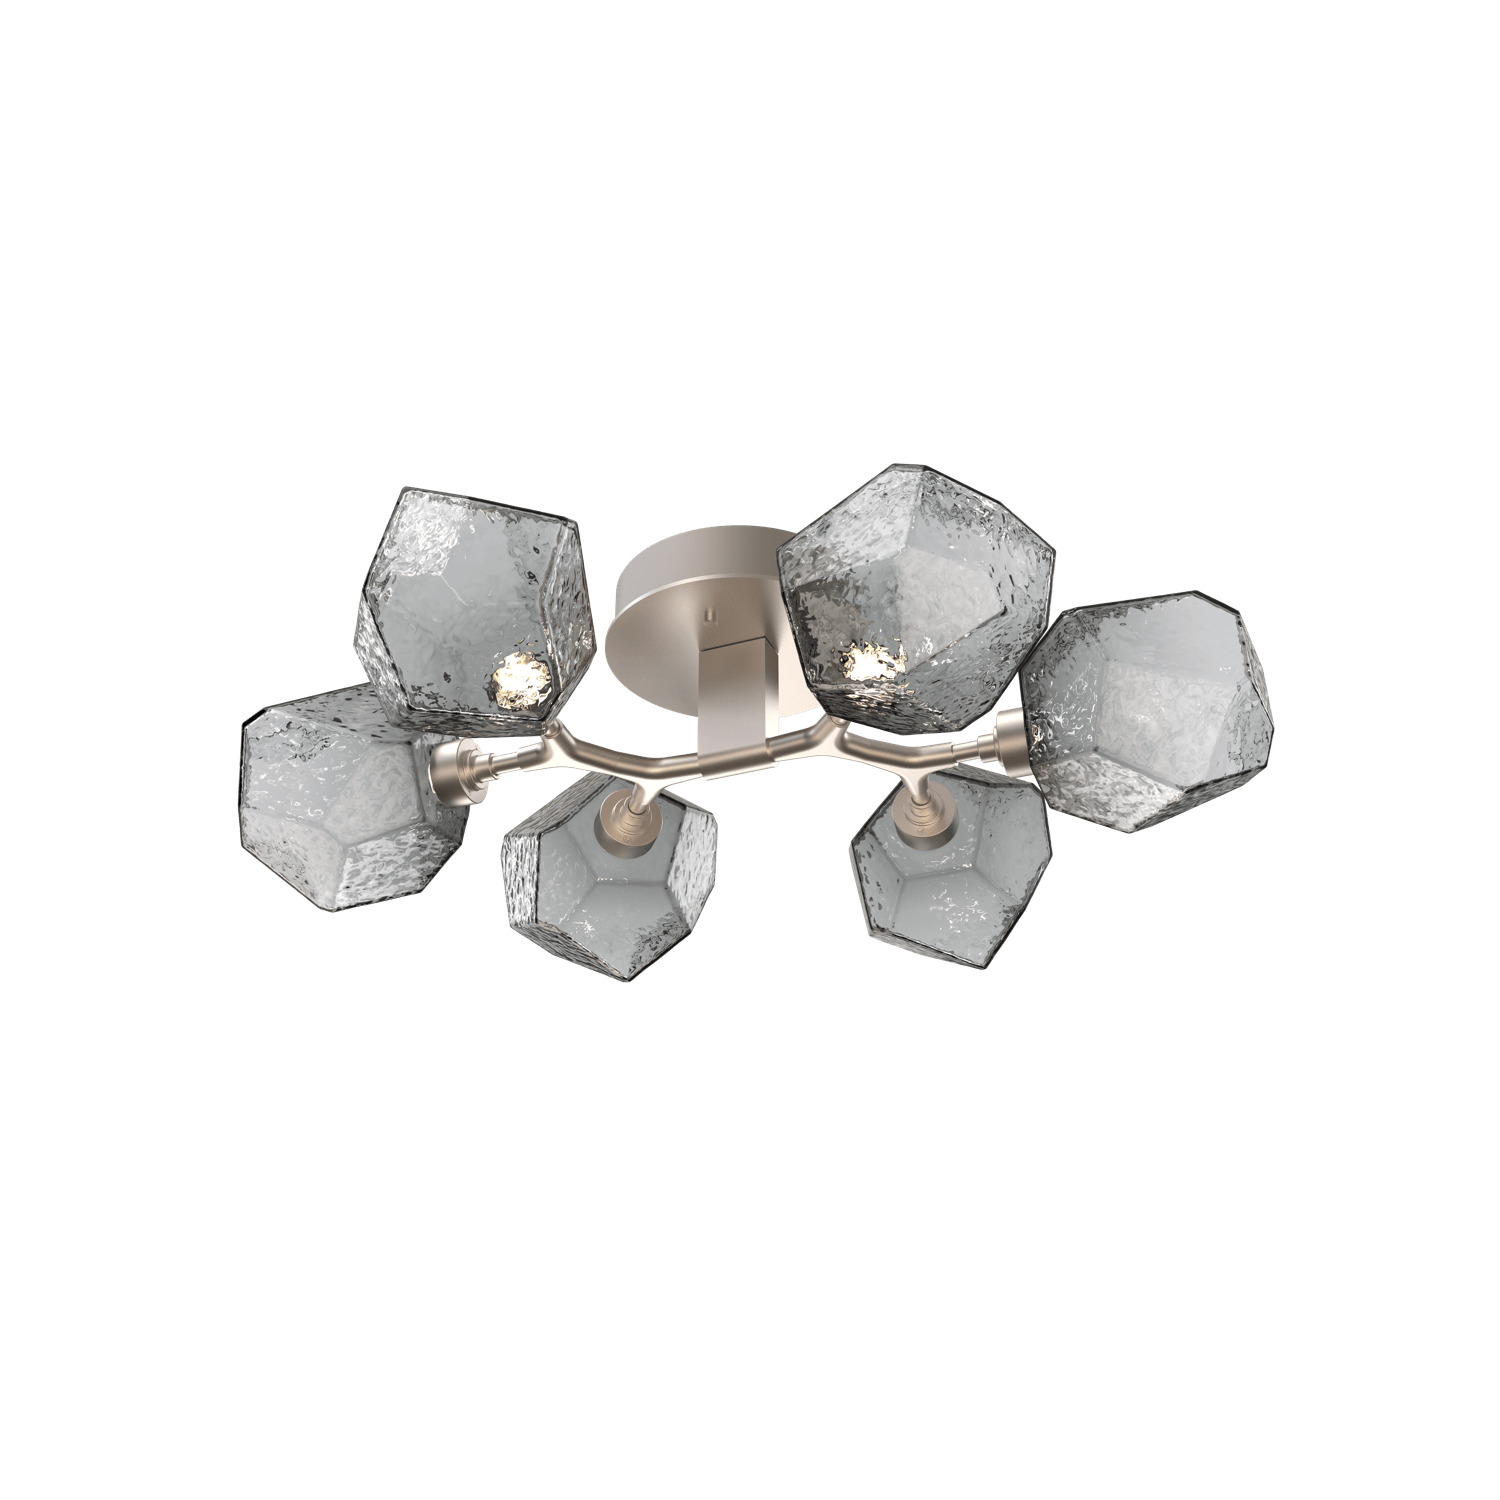 CLB0039-01-BS-S-Hammerton-Studio-Gem-6-light-organic-flush-mount-light-with-metallic-beige-silver-finish-and-smoke-blown-glass-shades-and-LED-lamping